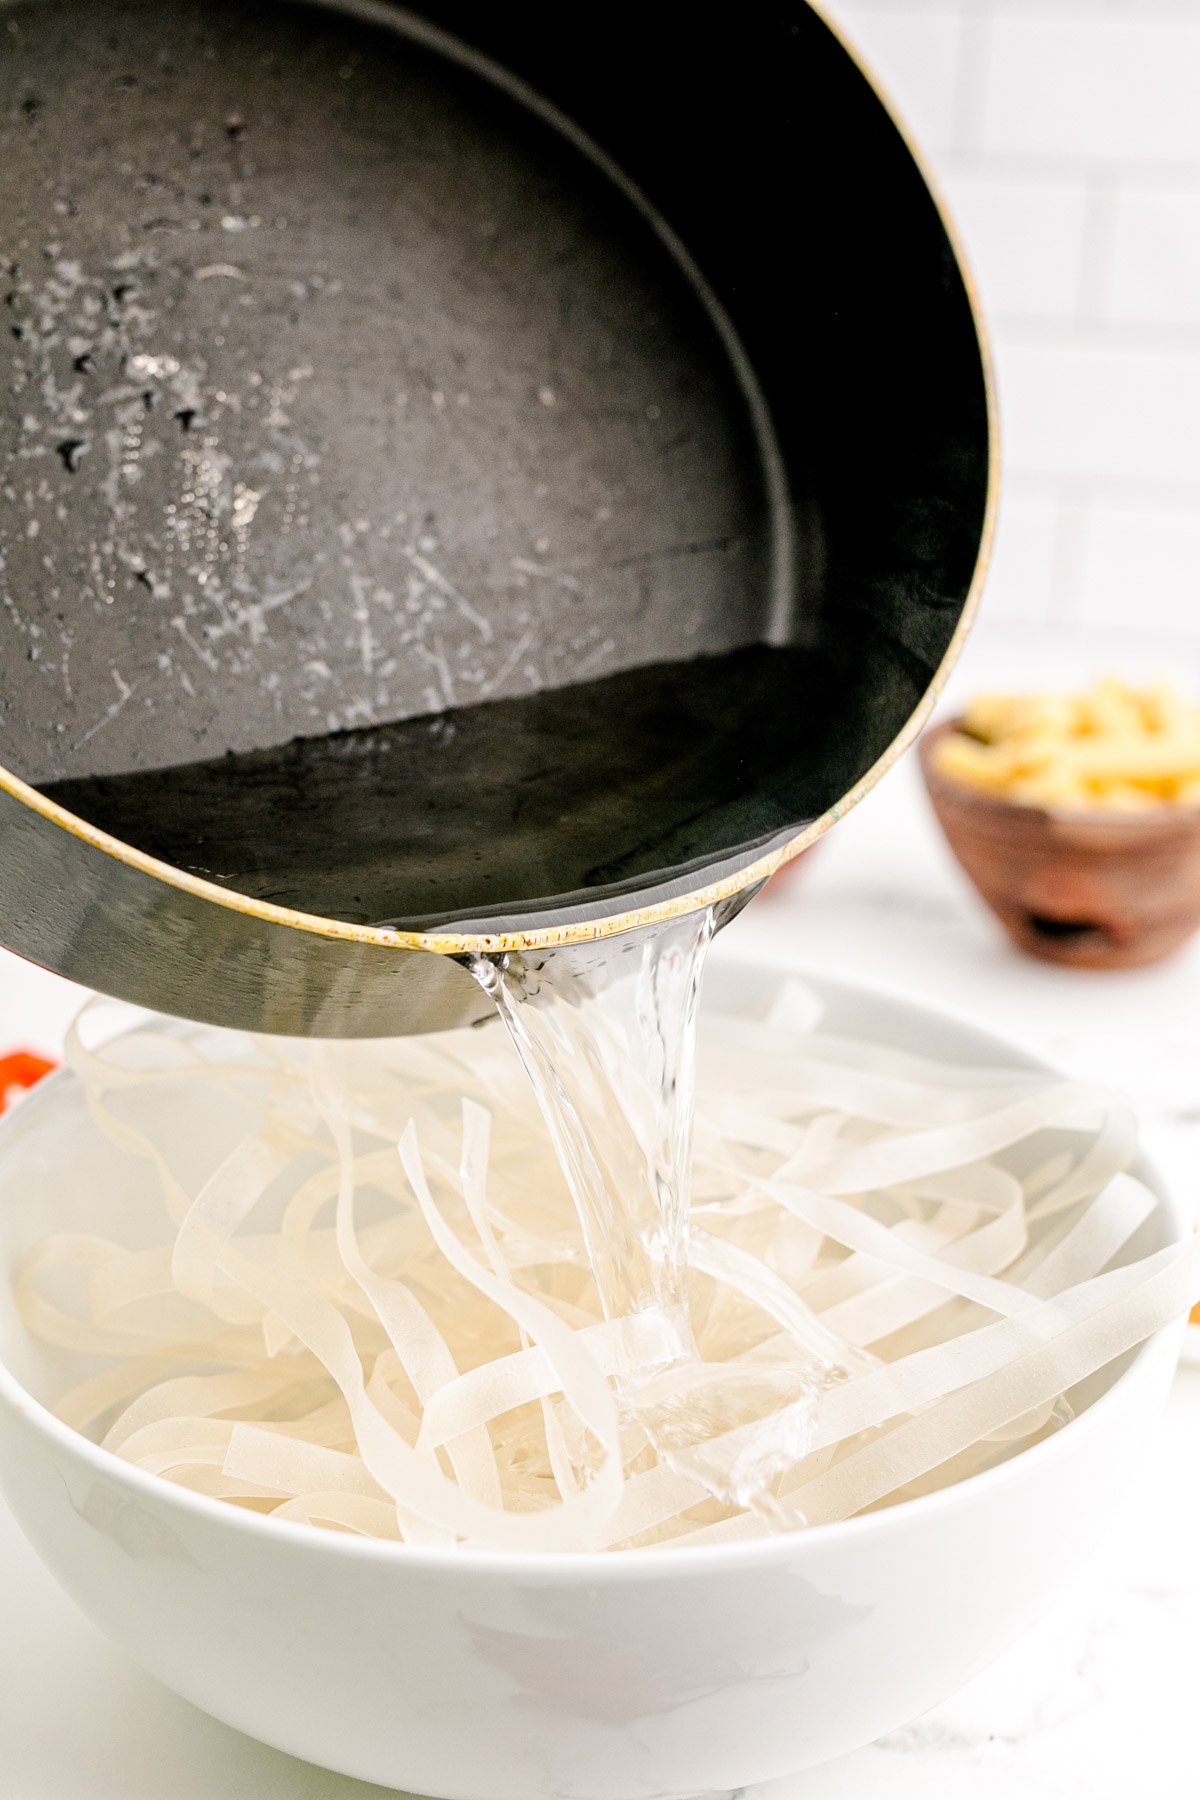 Boiling water being poured over rice noodles in a white bowl.